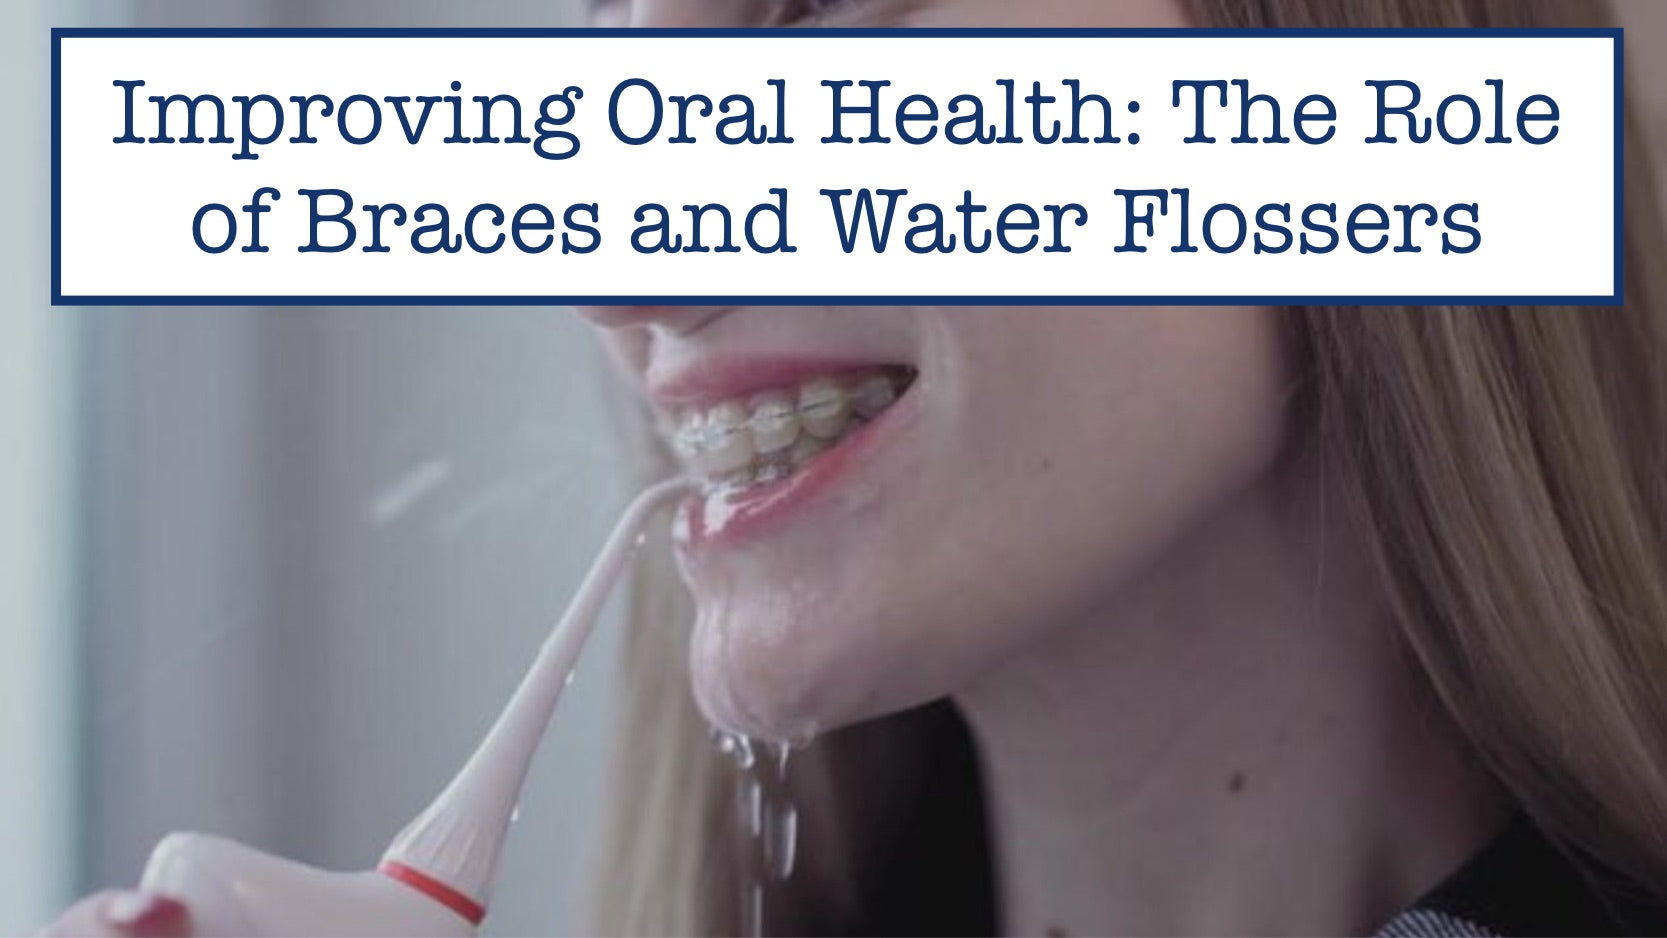 Improving Oral Health: The Role of Braces and Water Flossers